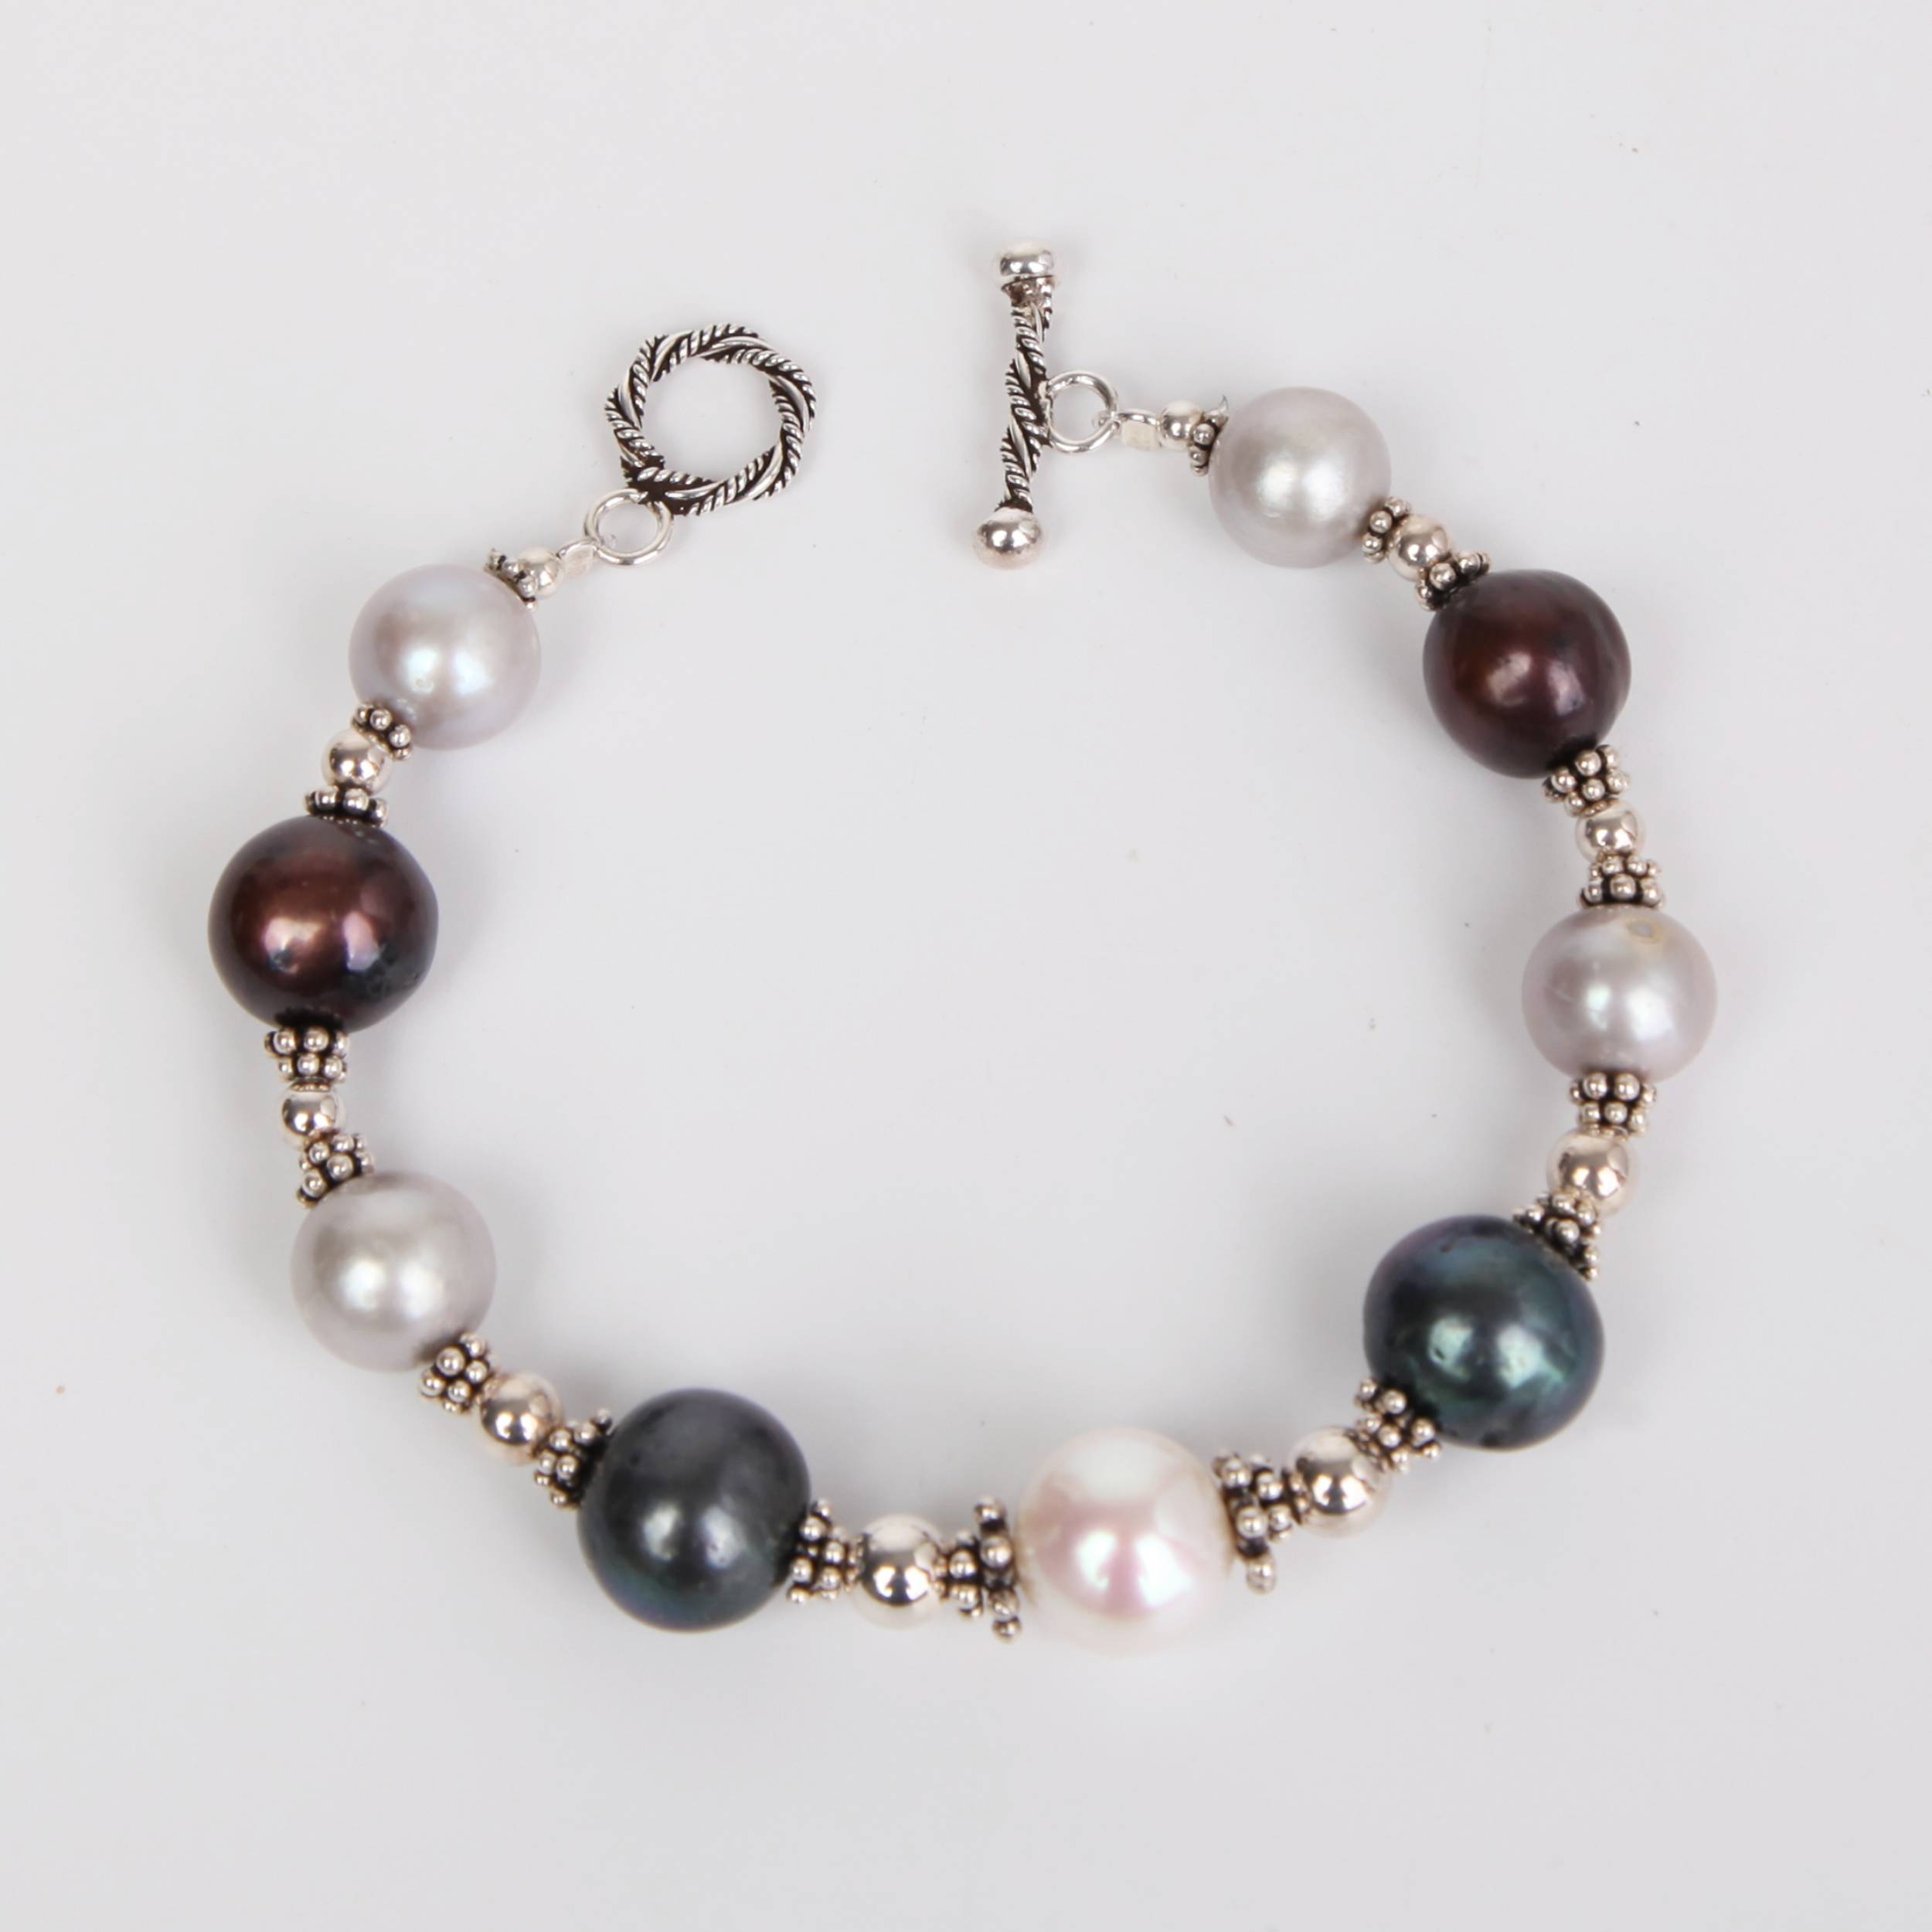 Tri-Toned Fresh Water Pearls Bracelet with Sterling Silver